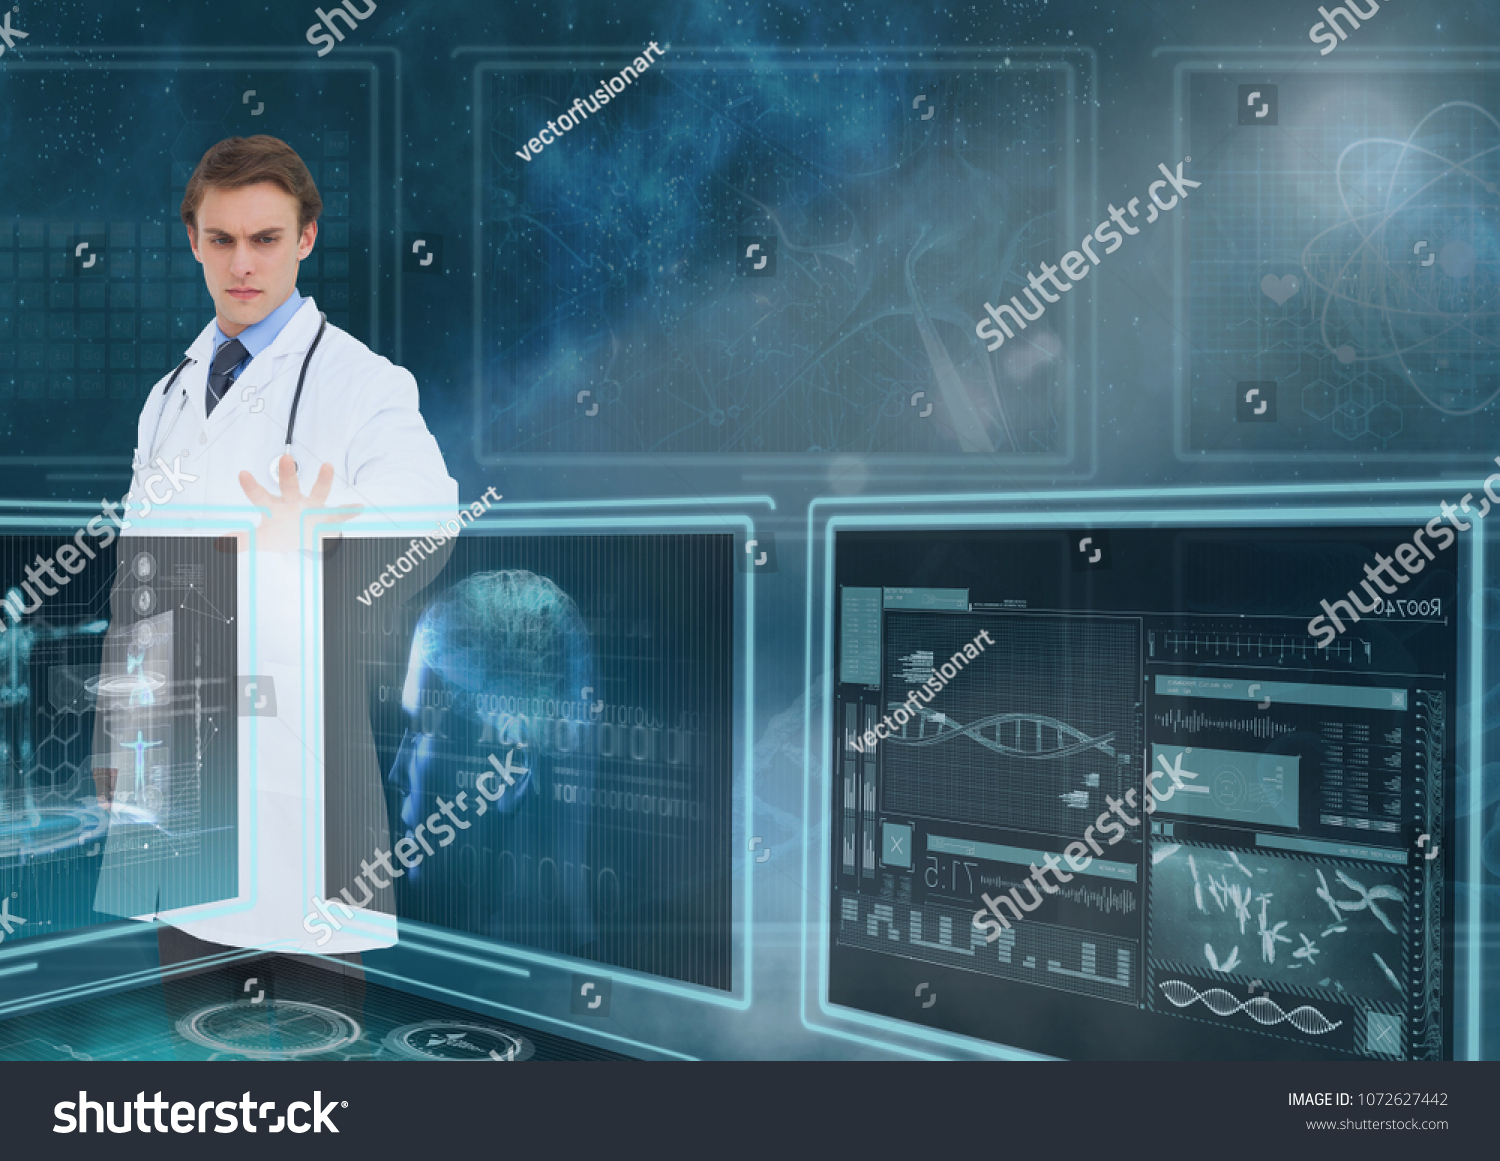 Man doctor interacting with medical interfaces against a sky with flares #1072627442